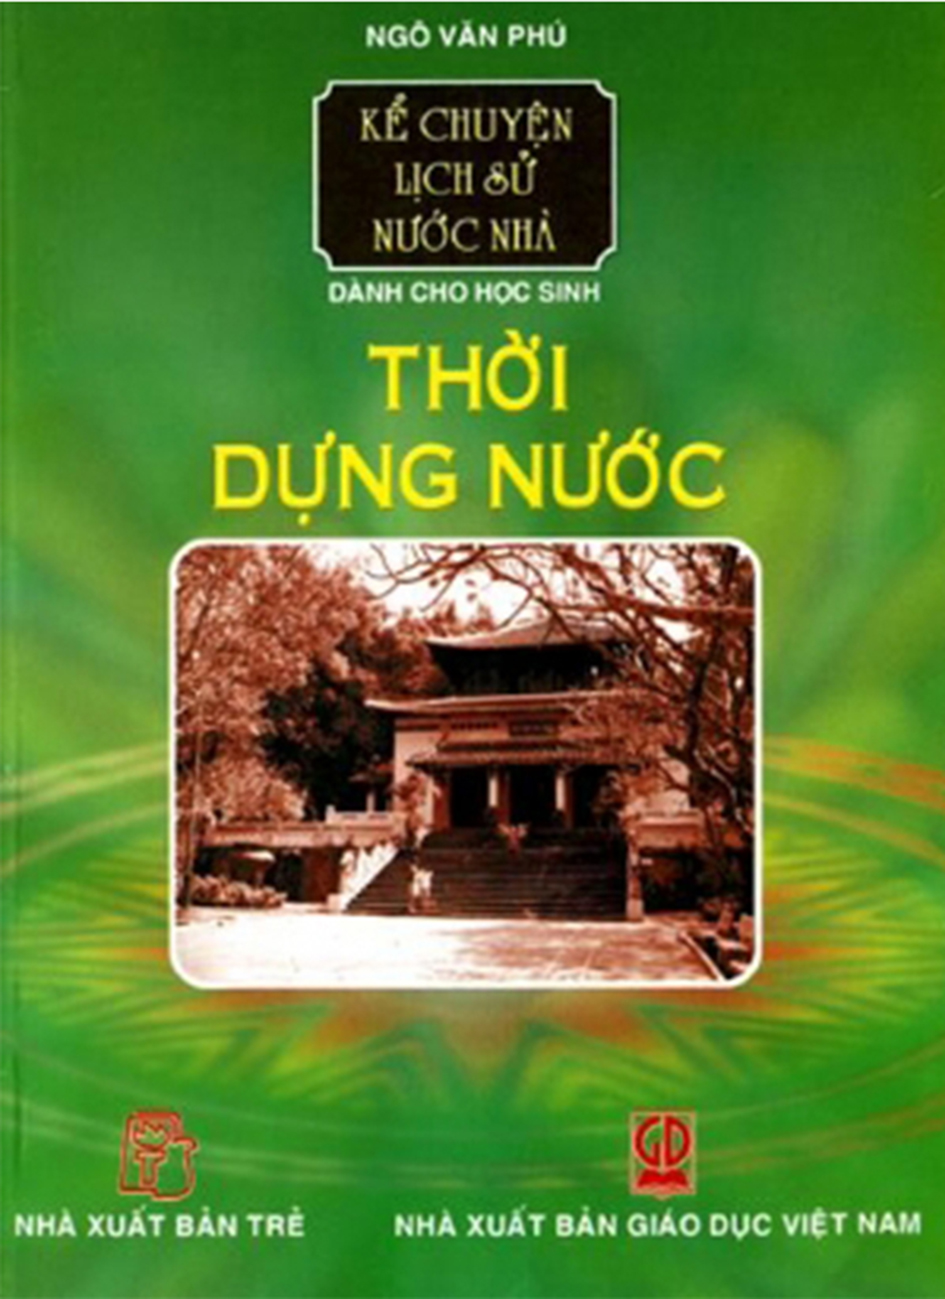 thoi dung nuoc